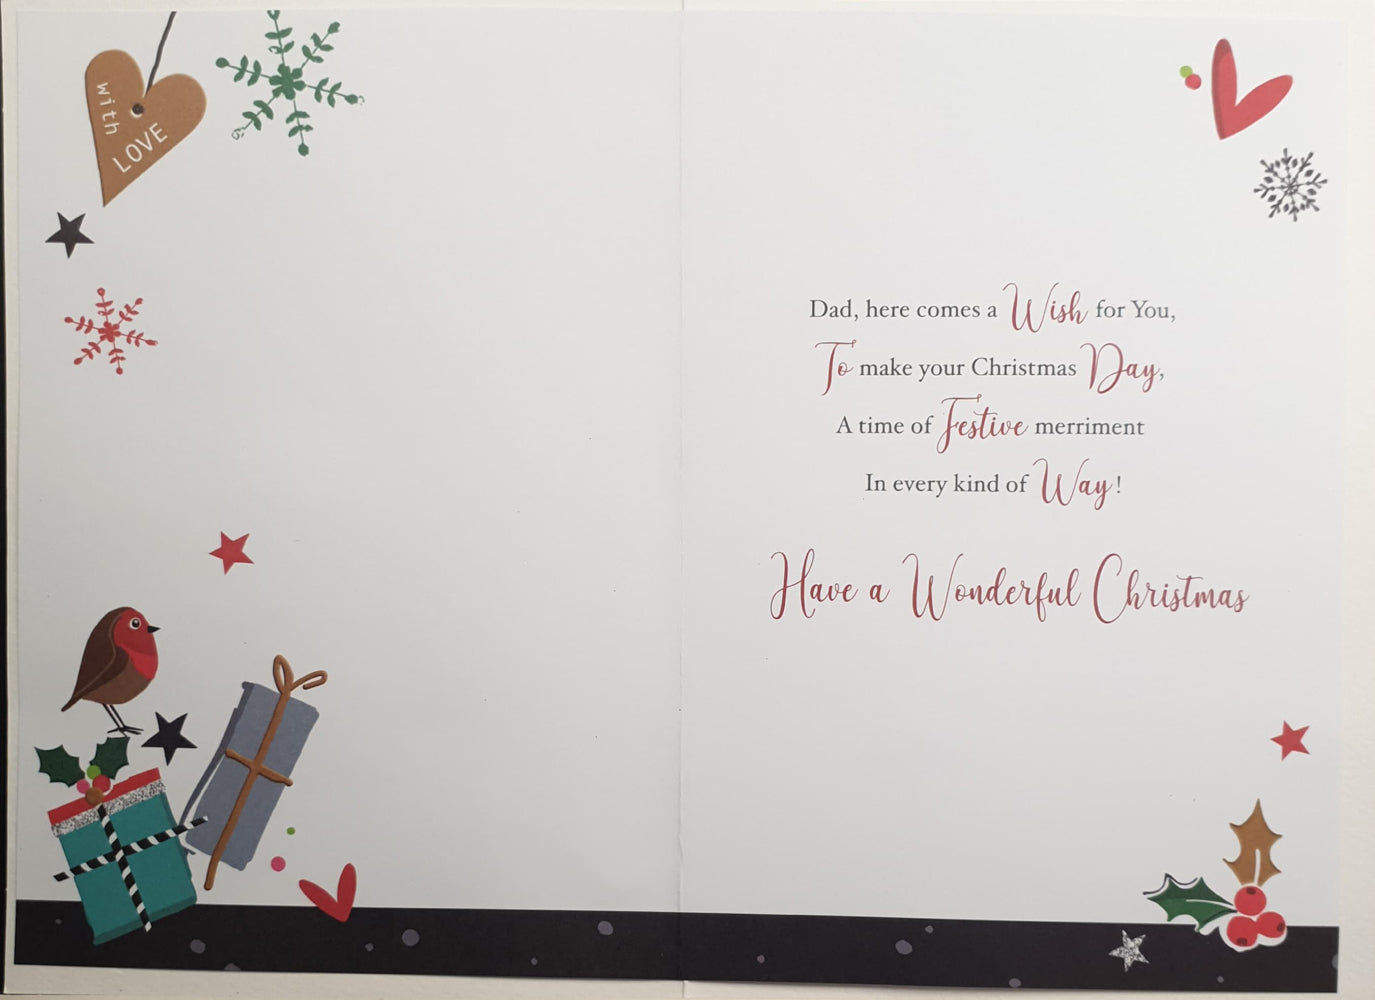 Special Dad Christmas Card - Red Car & Loading With Gifts